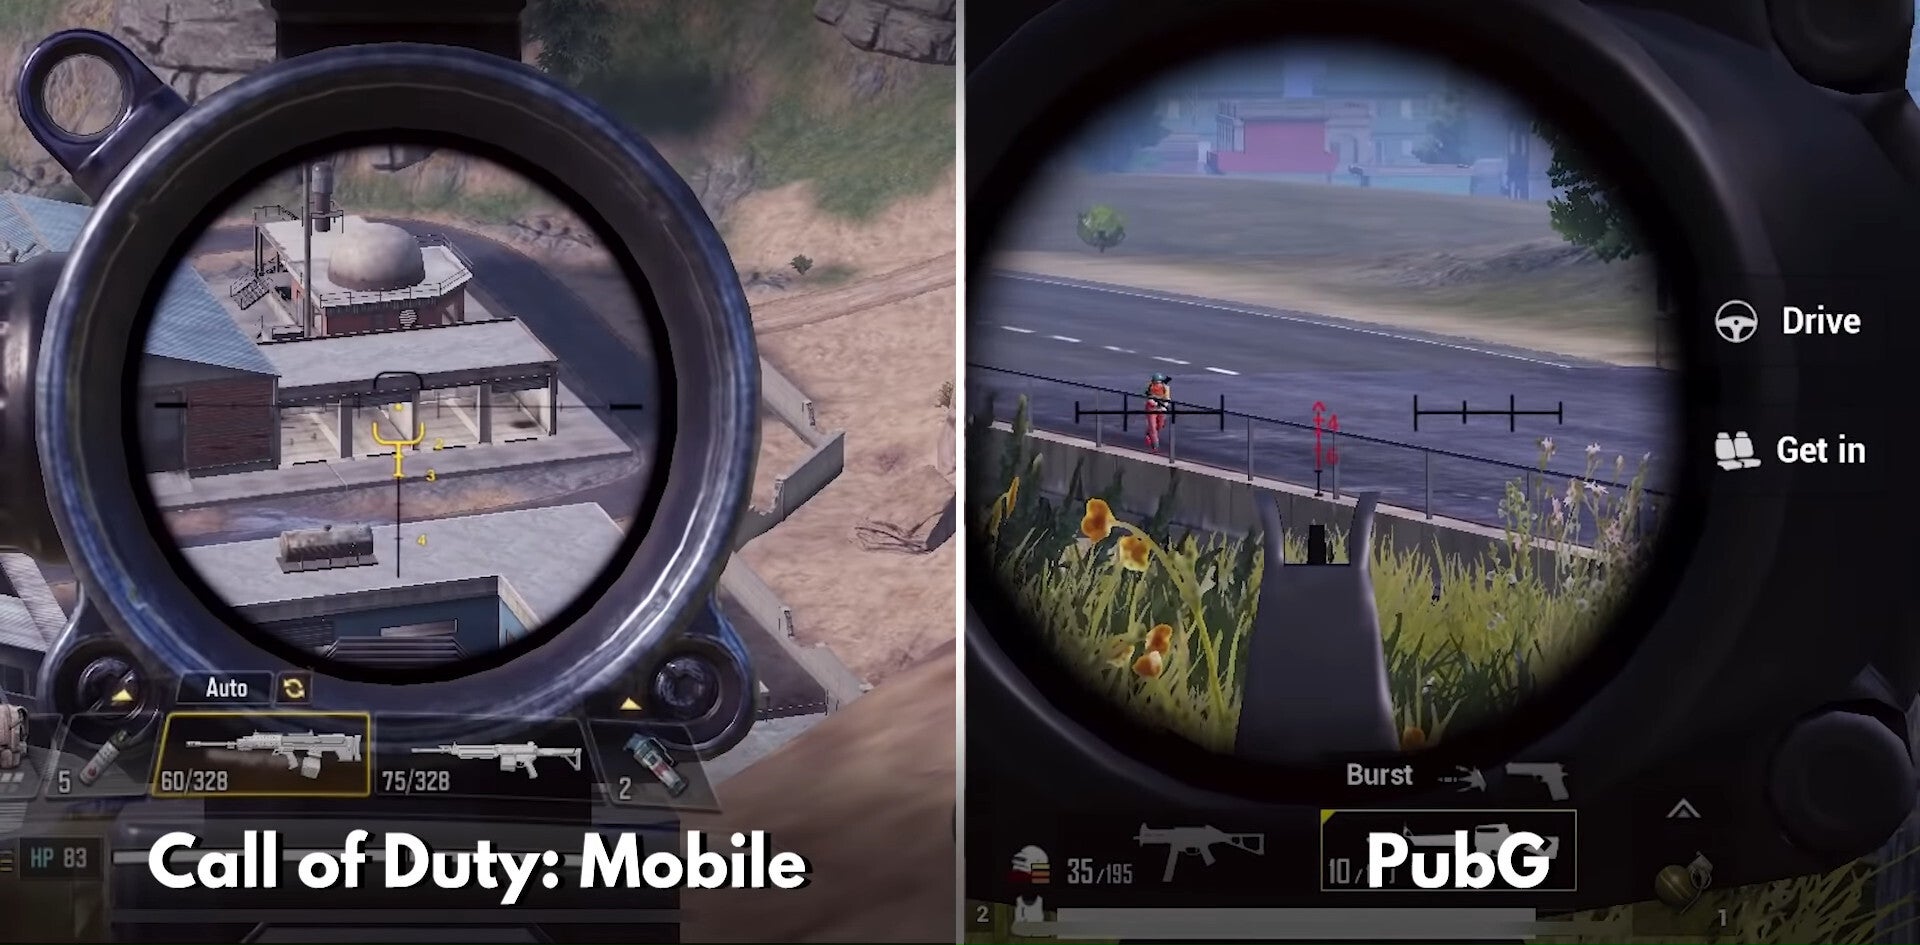 Call of Duty vs PubG Comparison: which one has the better battle royale?